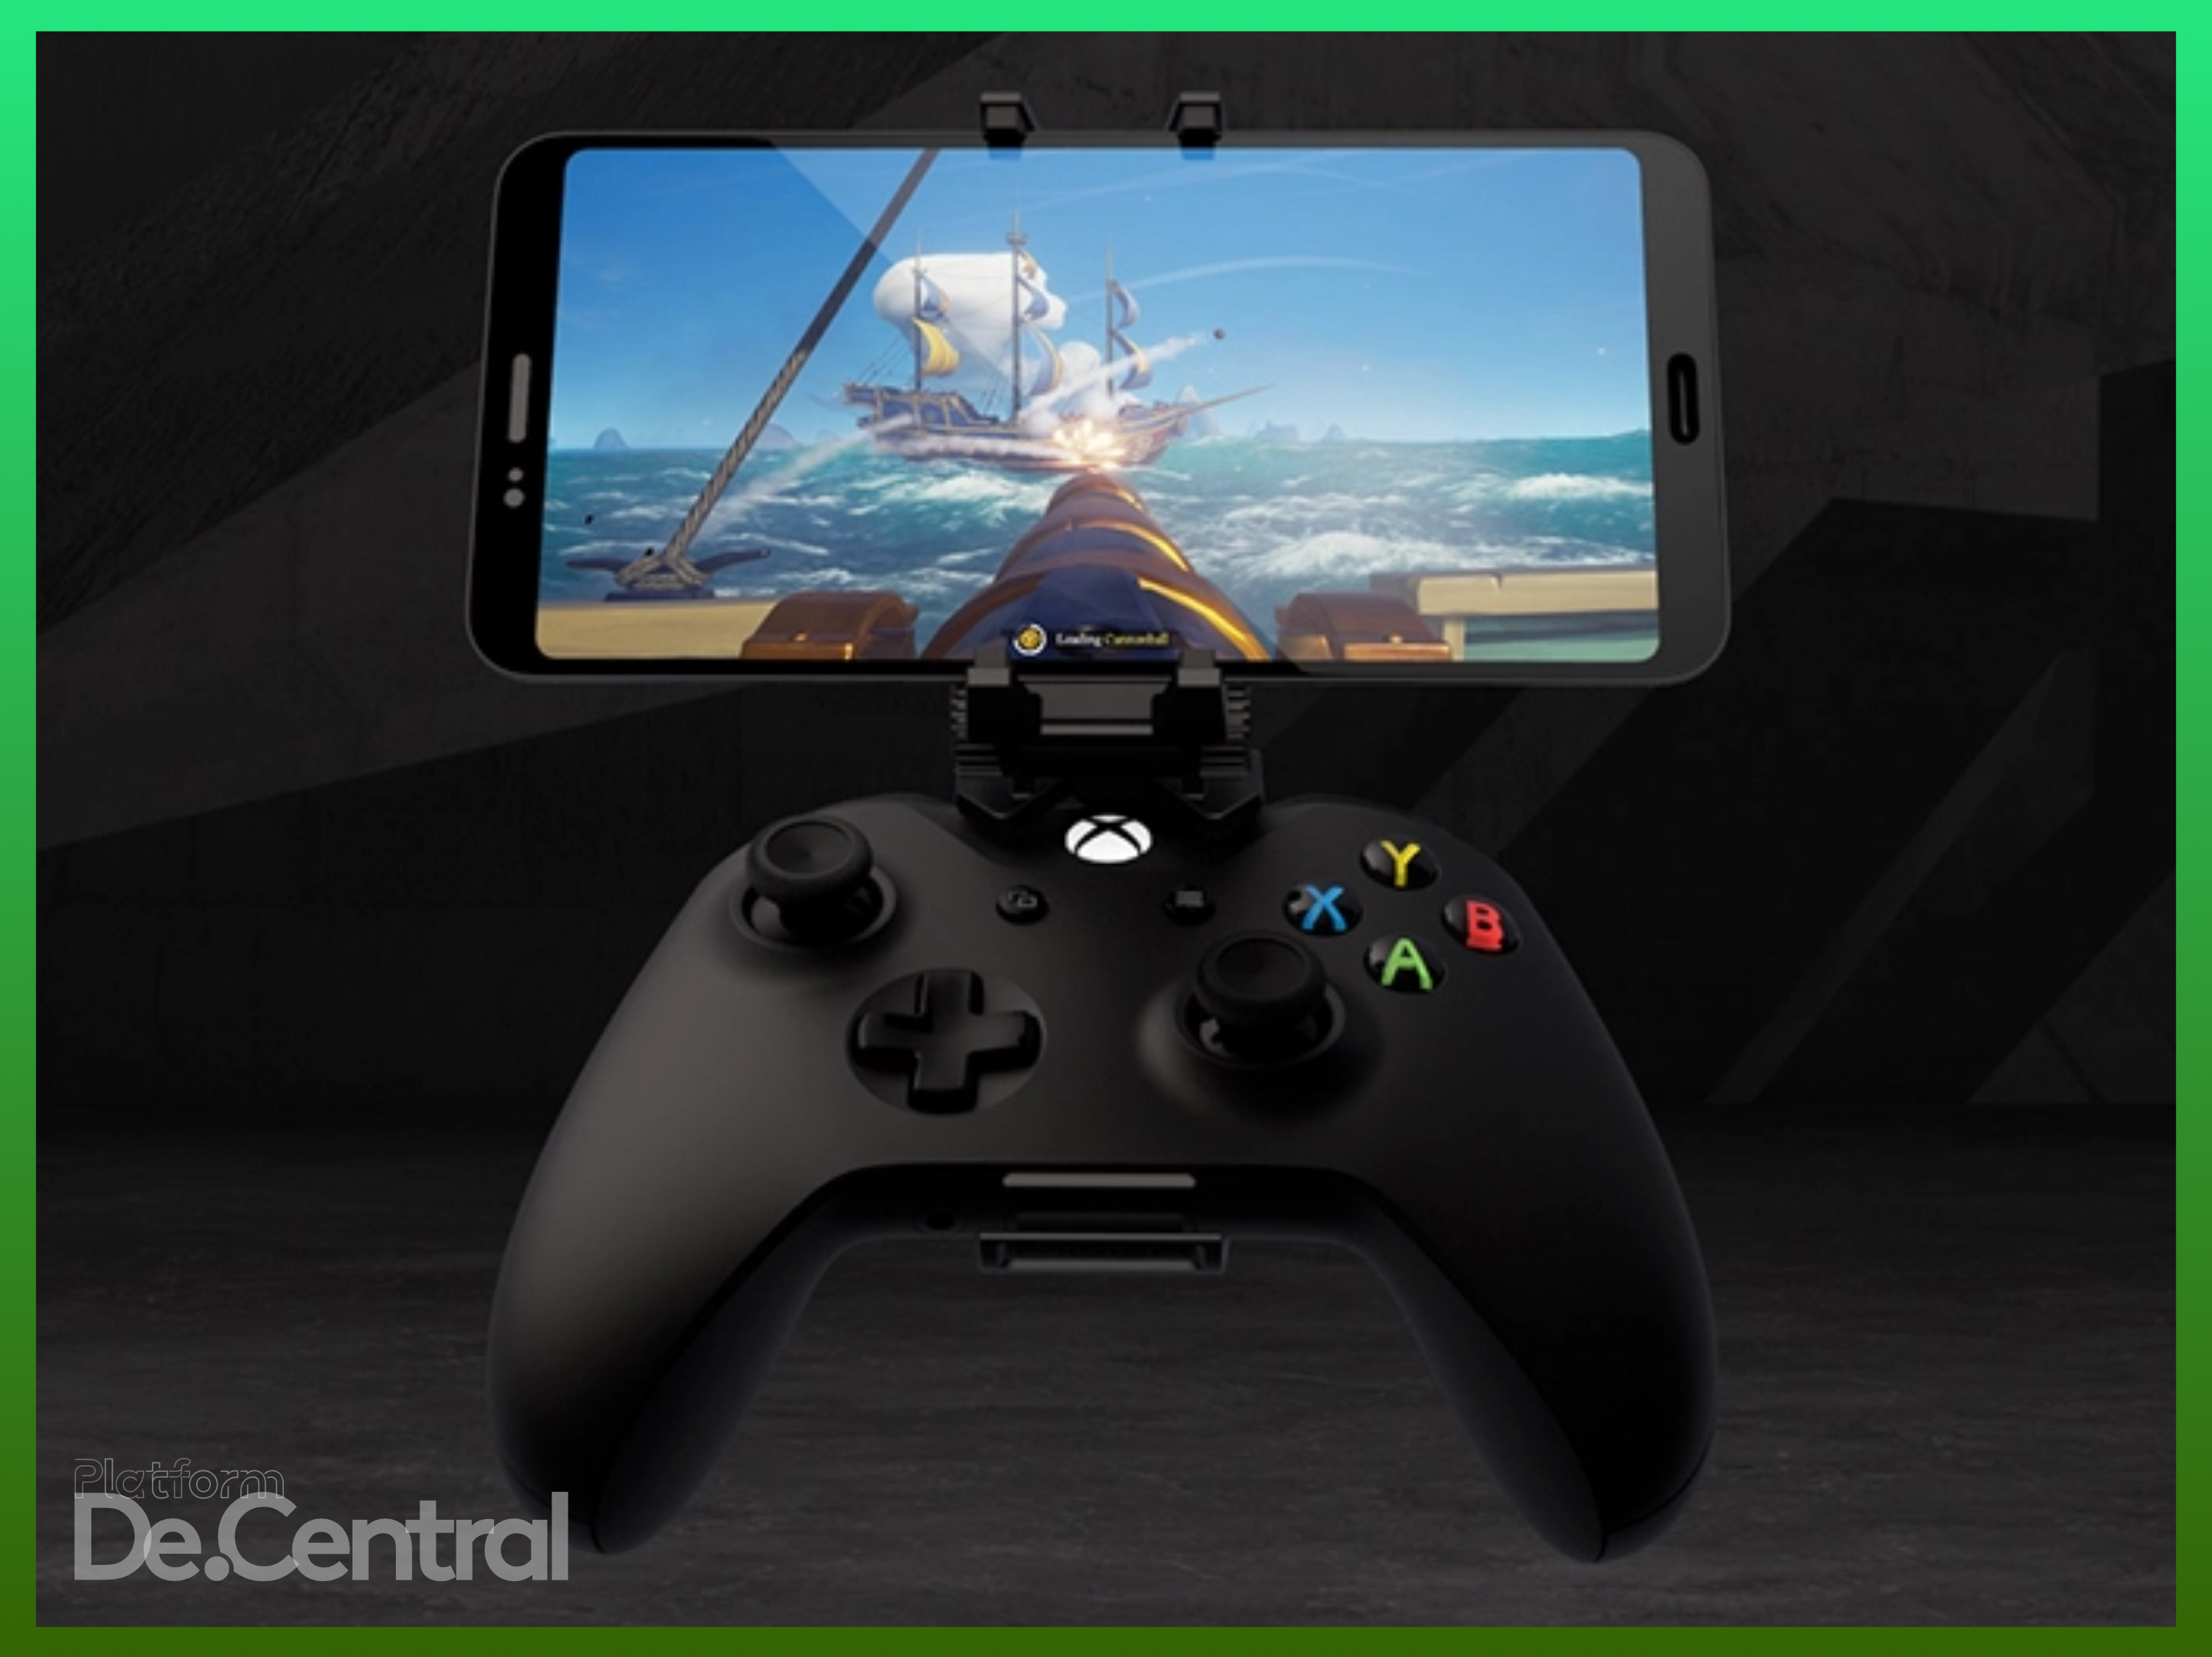 With Xbox Series X, XCloud will be the most powerful gaming cloud